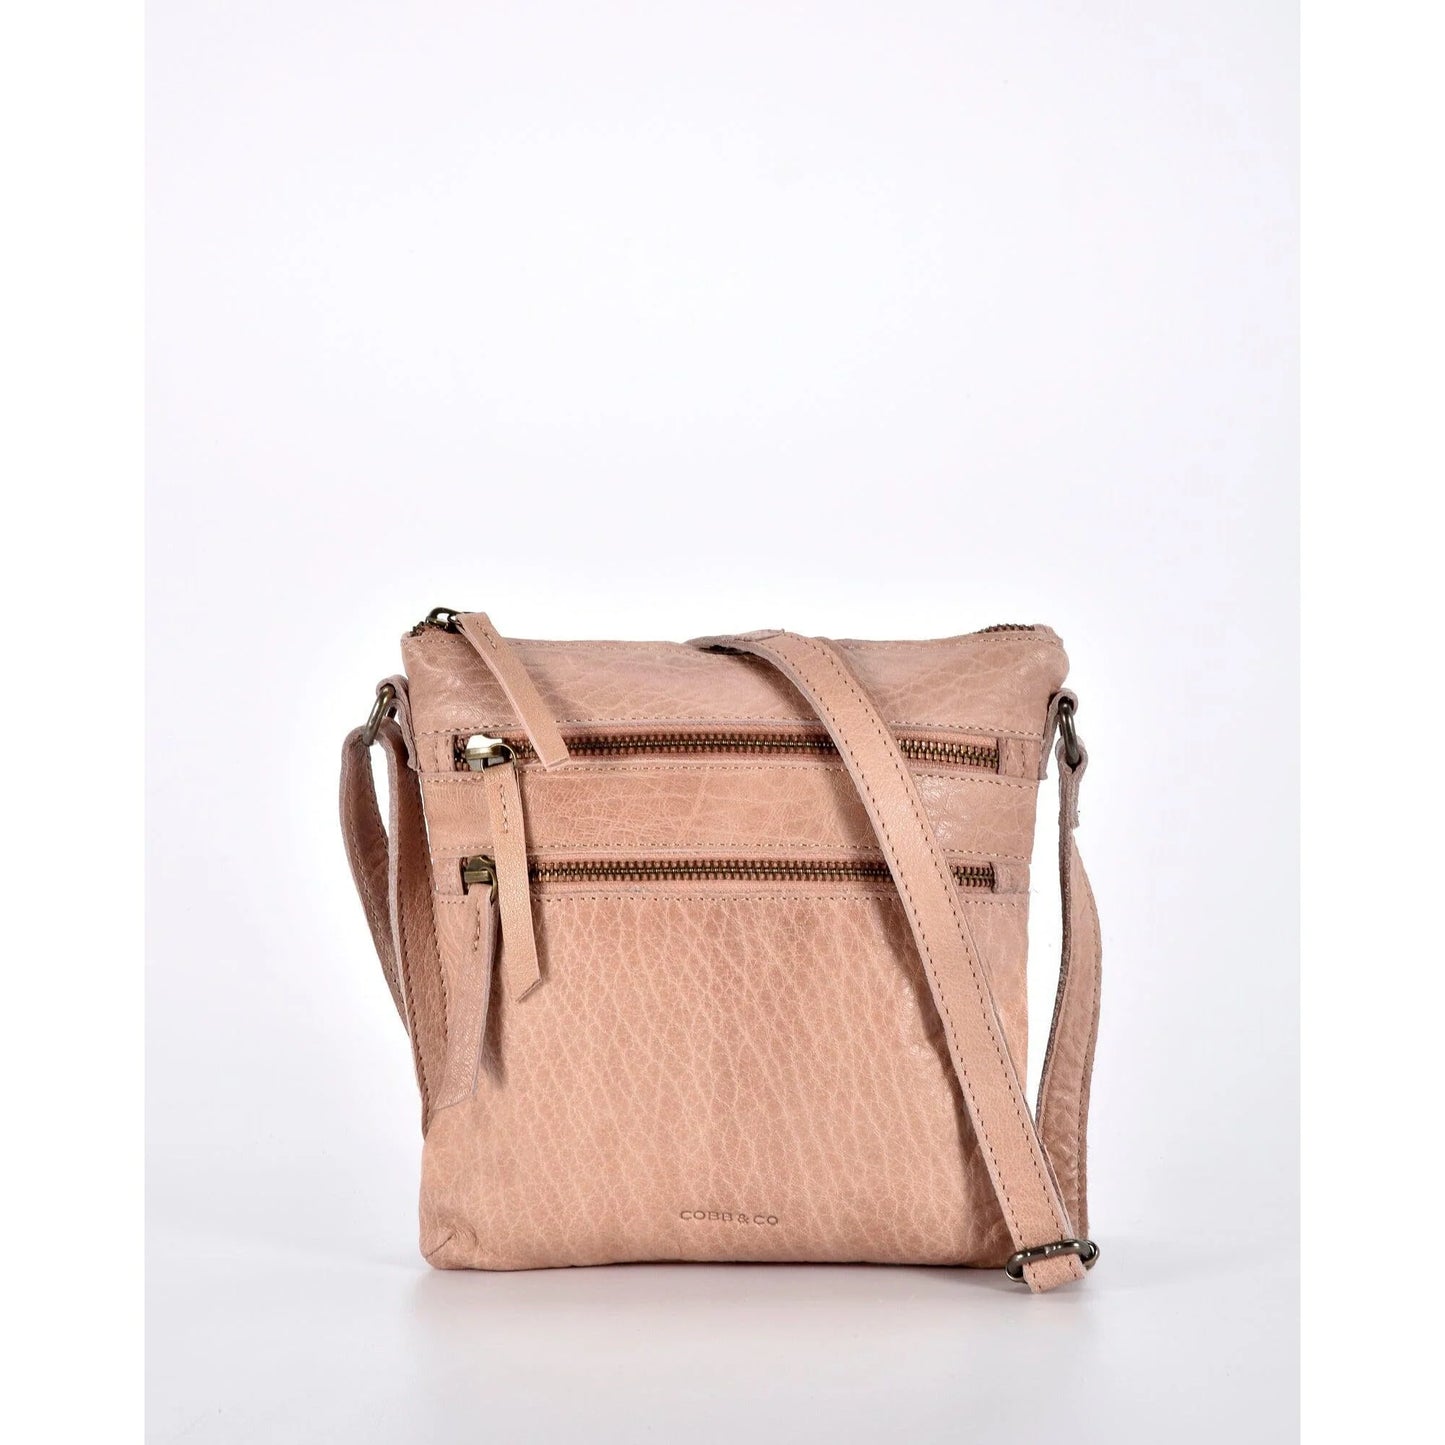 Cobb and Co Barton Leather zipped shoulder Bag